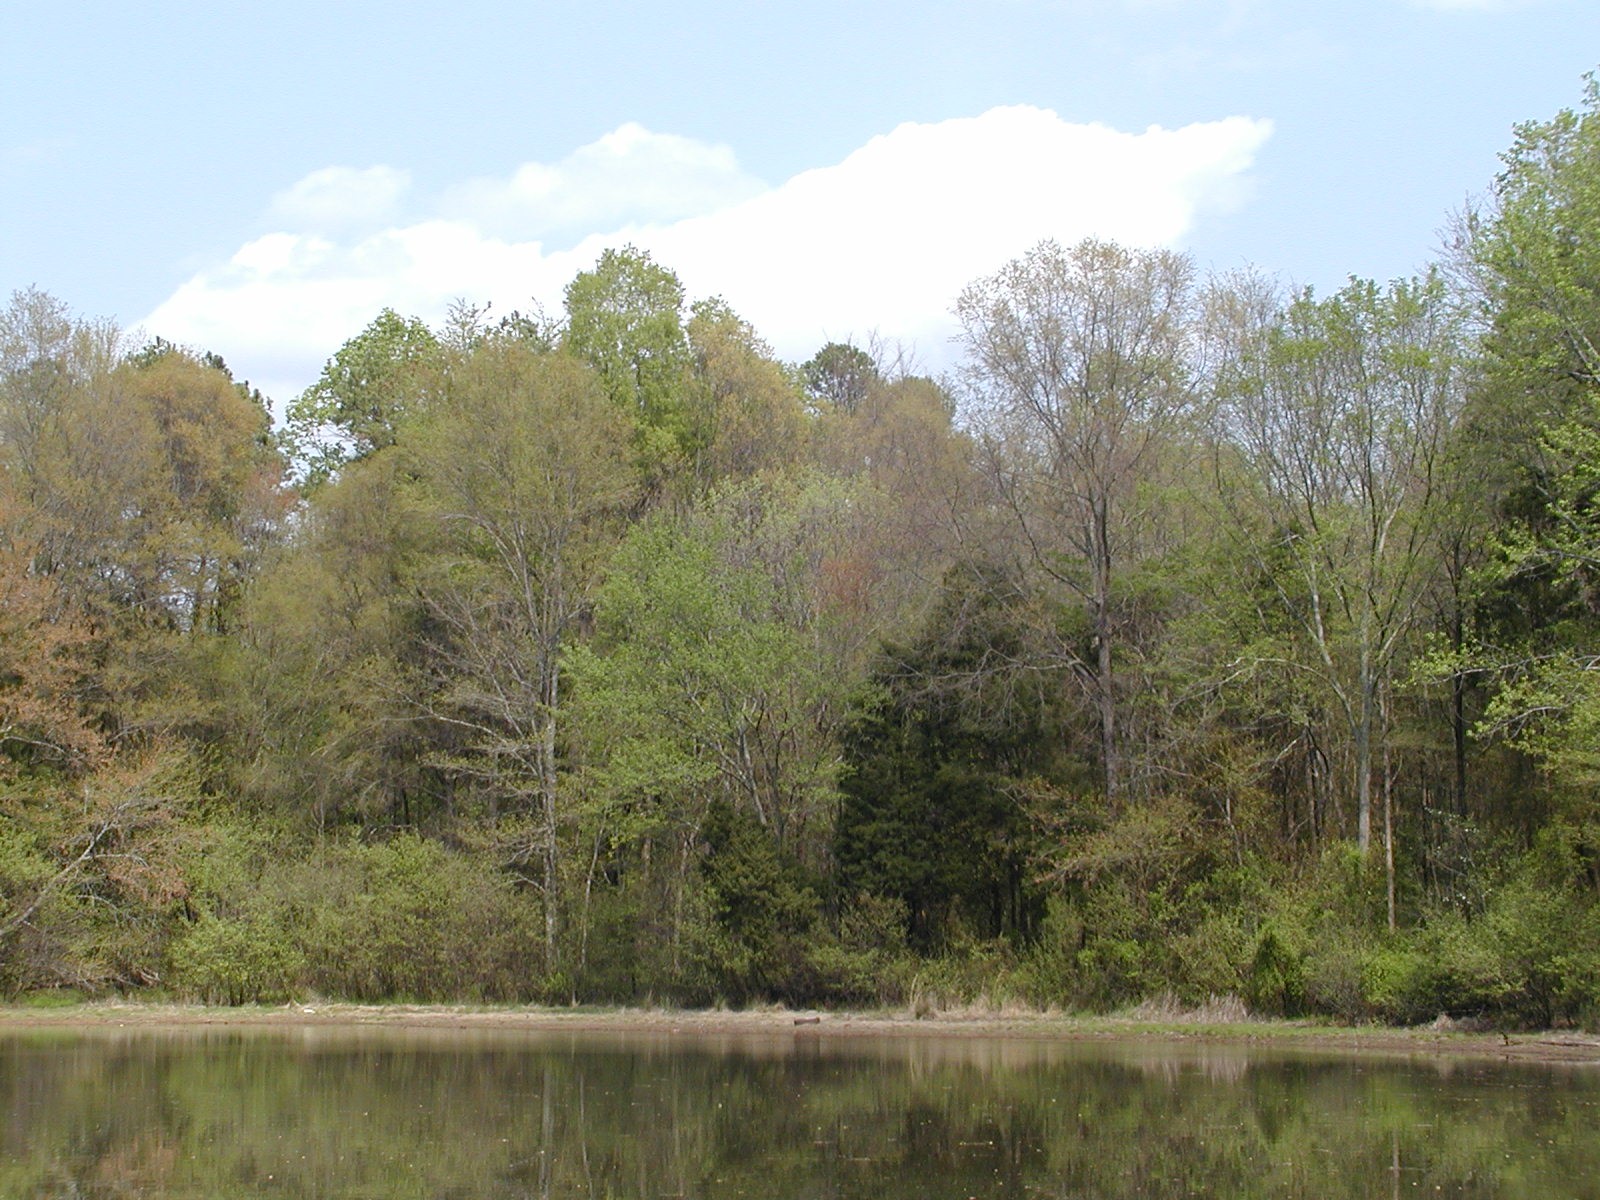 Trees and pond at Beaty Park